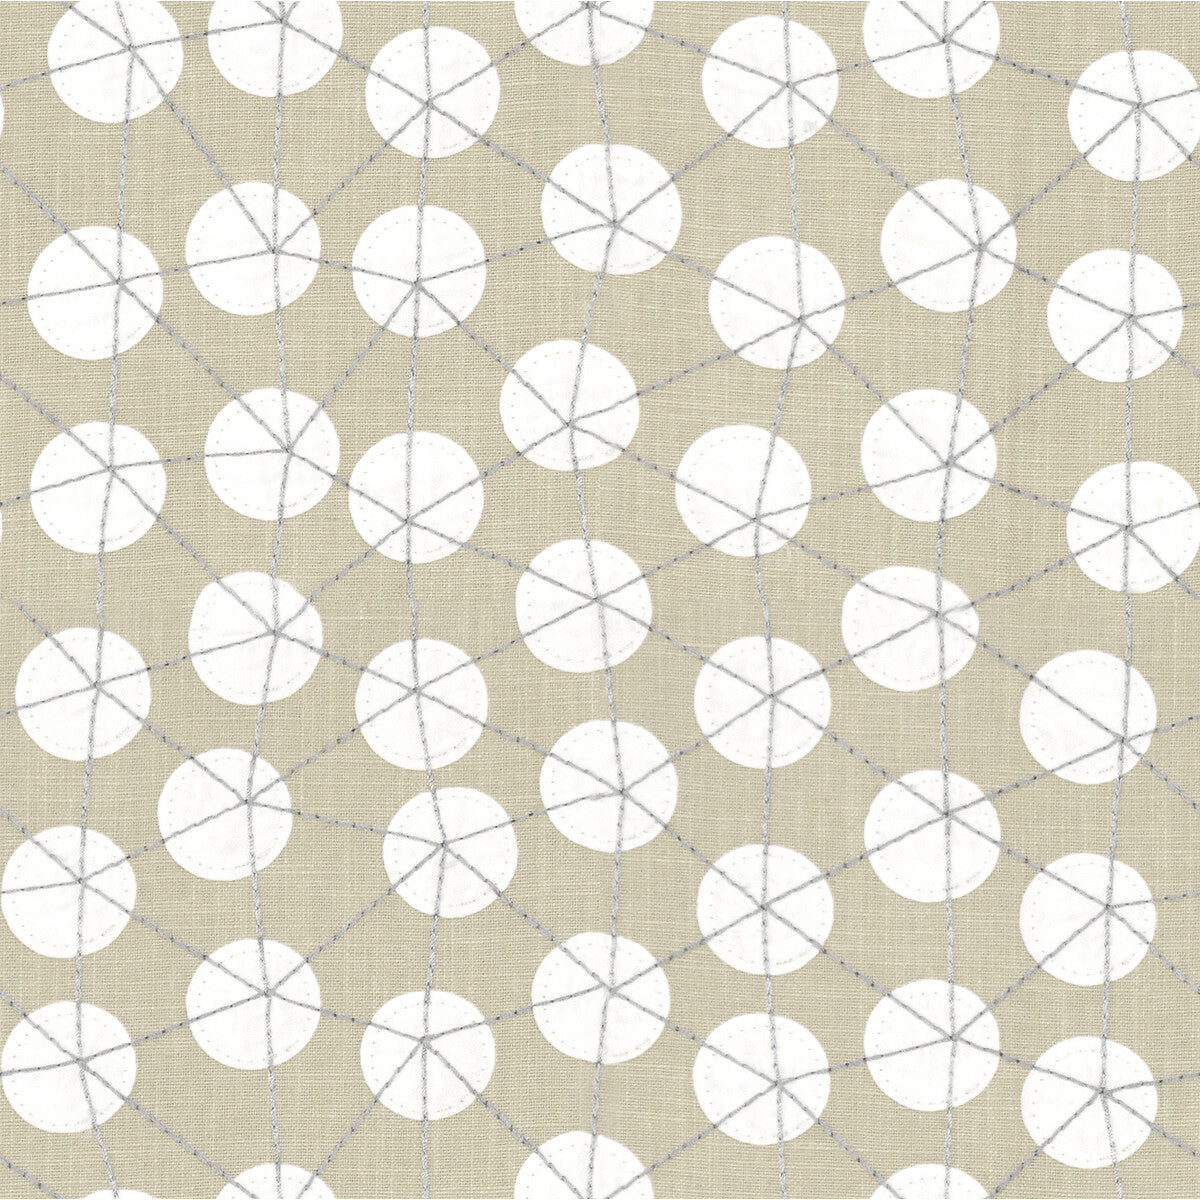 Goaround fabric in sand color - pattern 4242.1611.0 - by Kravet Design